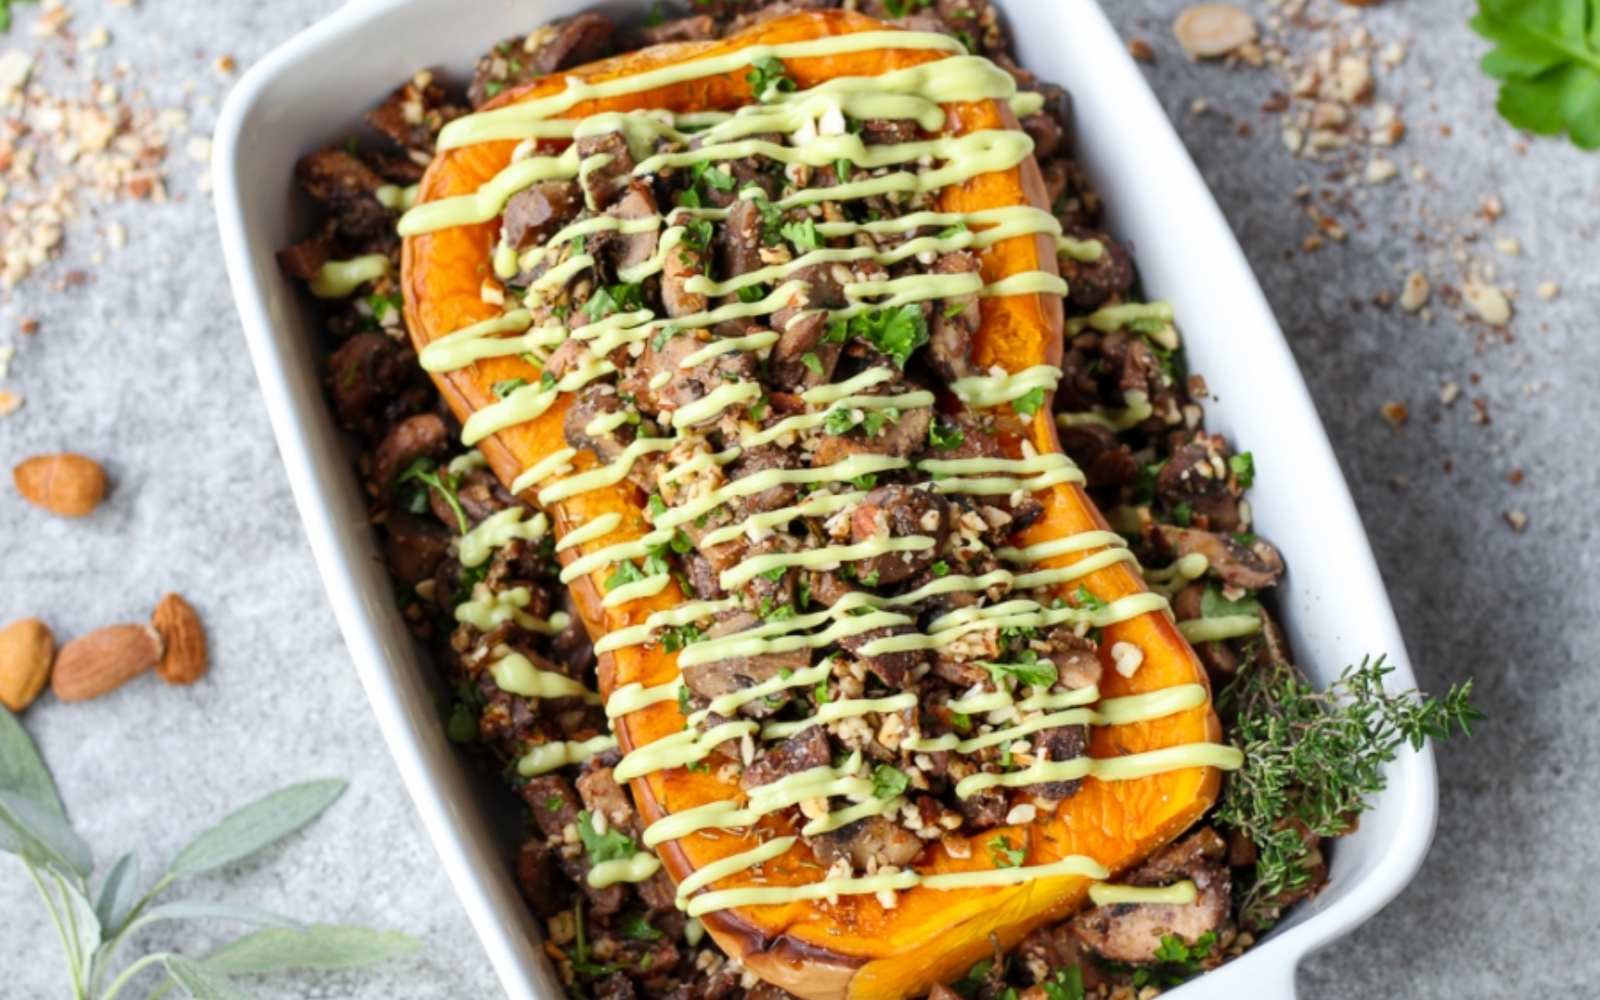 Roasted Butternut Squash With Mushroom Stuffing